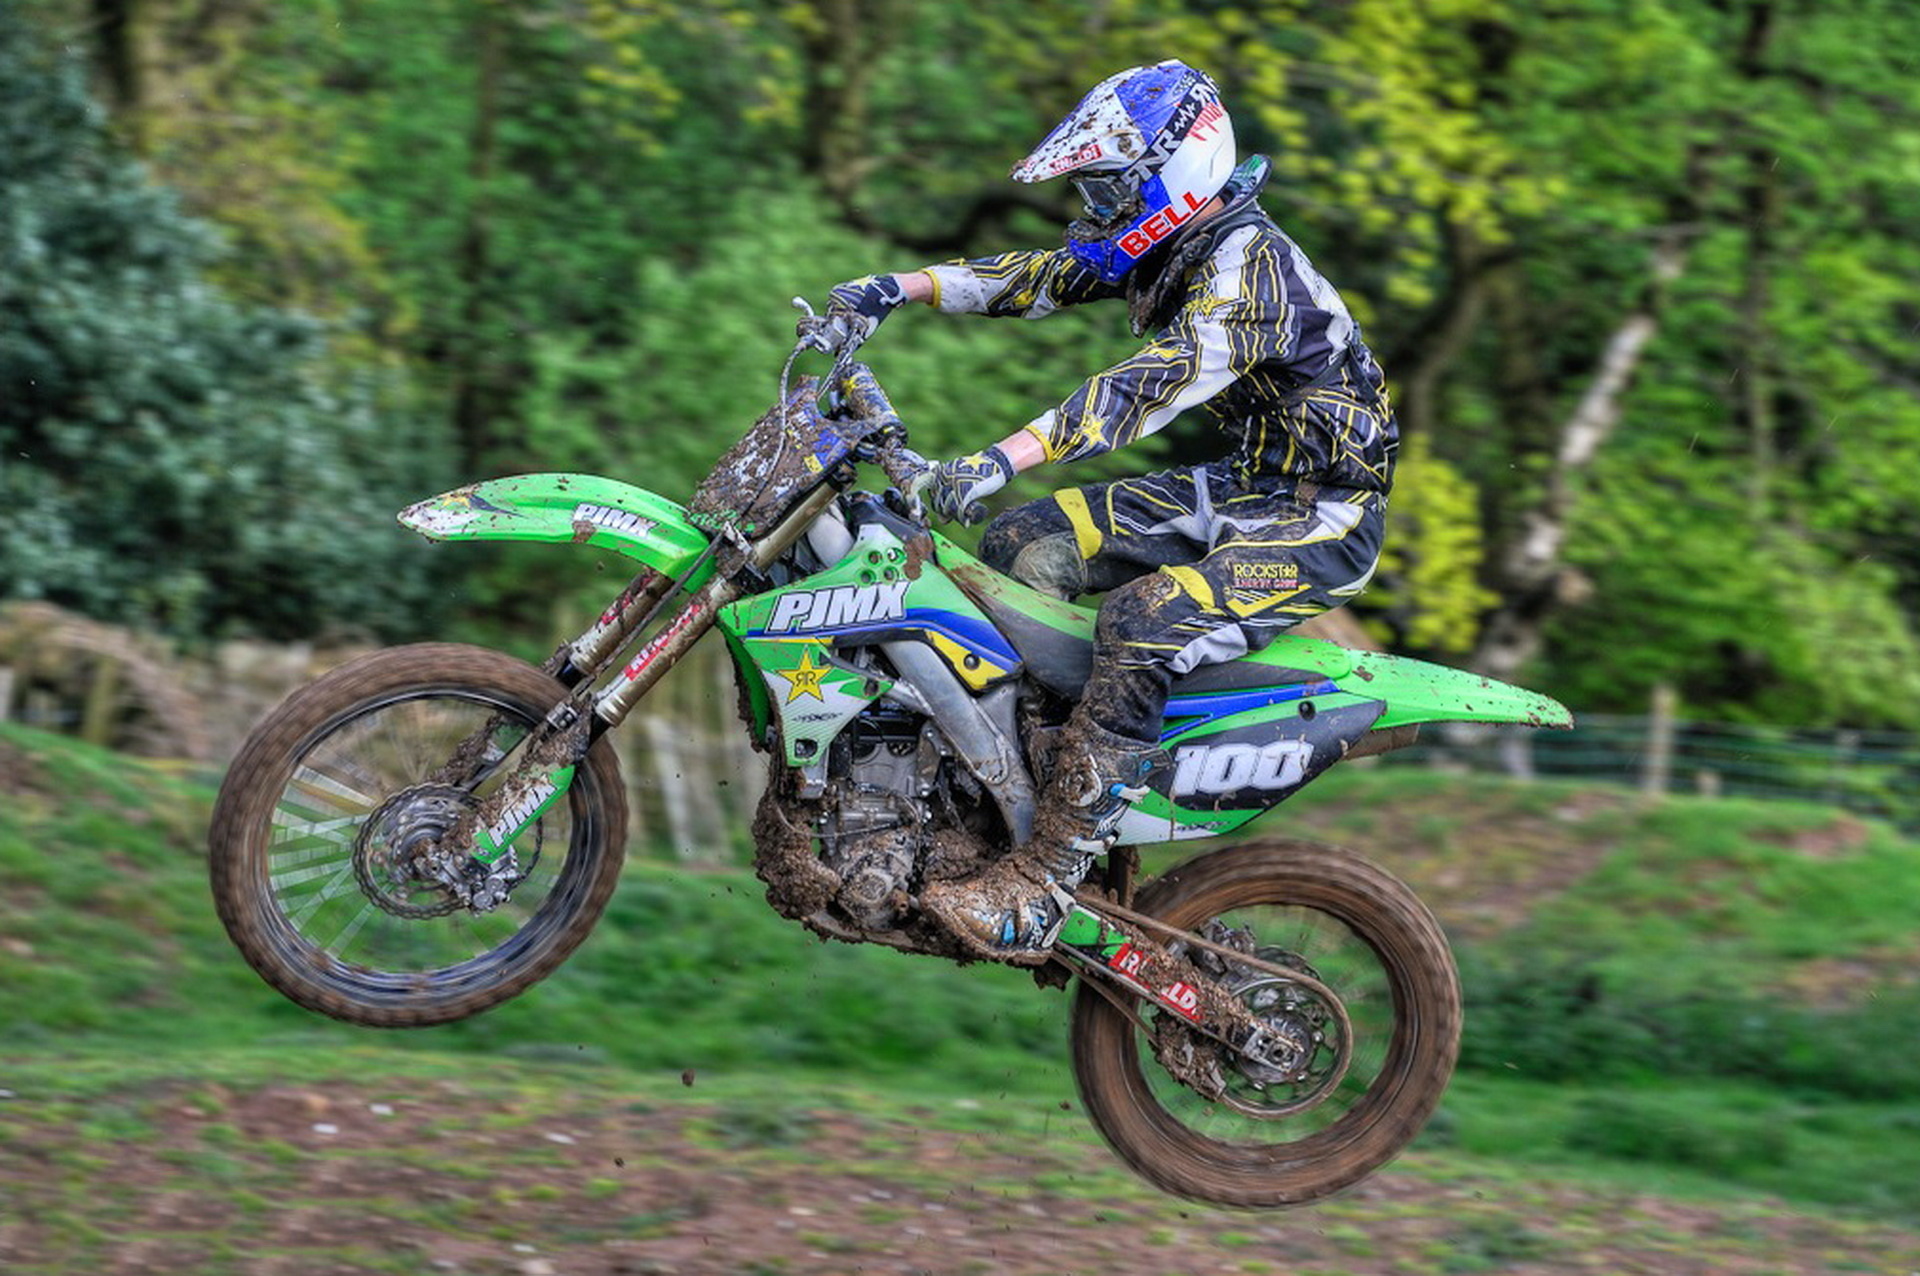 motocross, motorcycles, motorcycle, racer, competitions Full HD